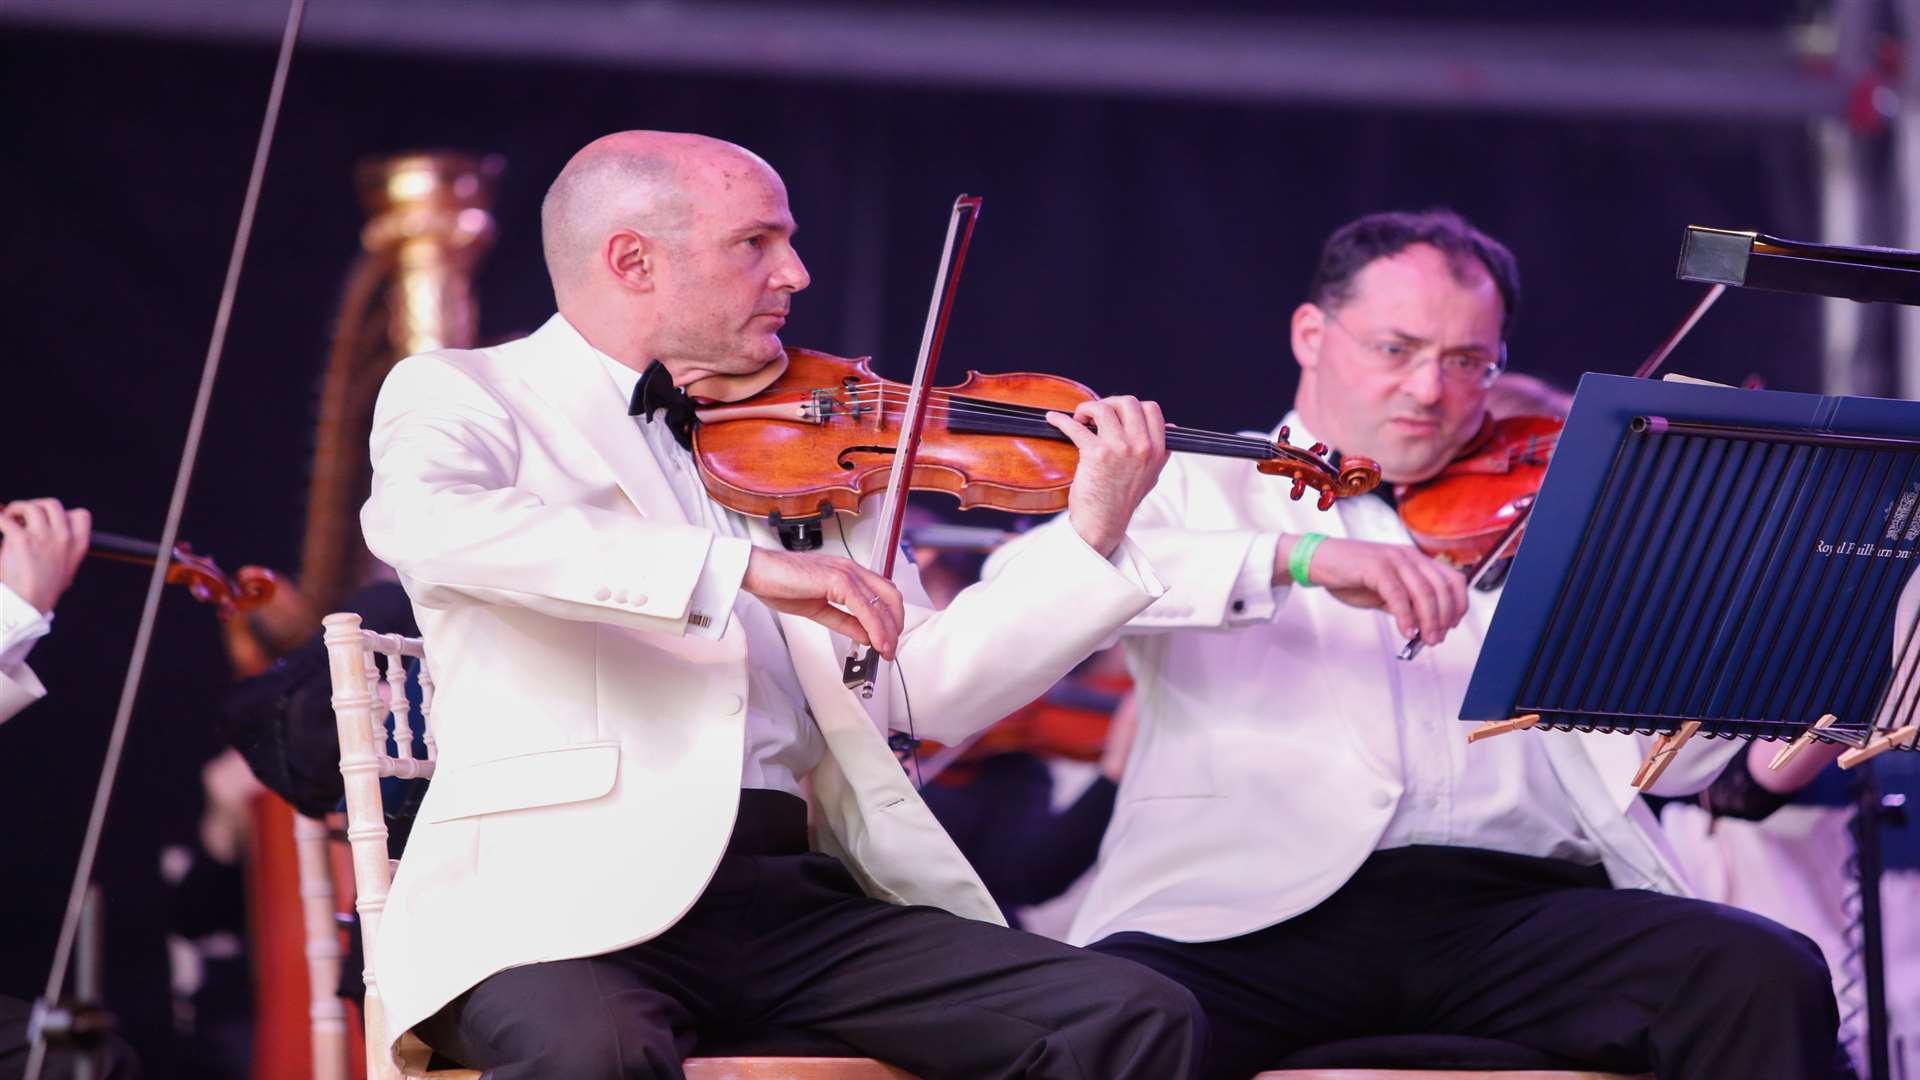 The Royal Philharmonic Orchestra at the Leeds Castle Classical Concert